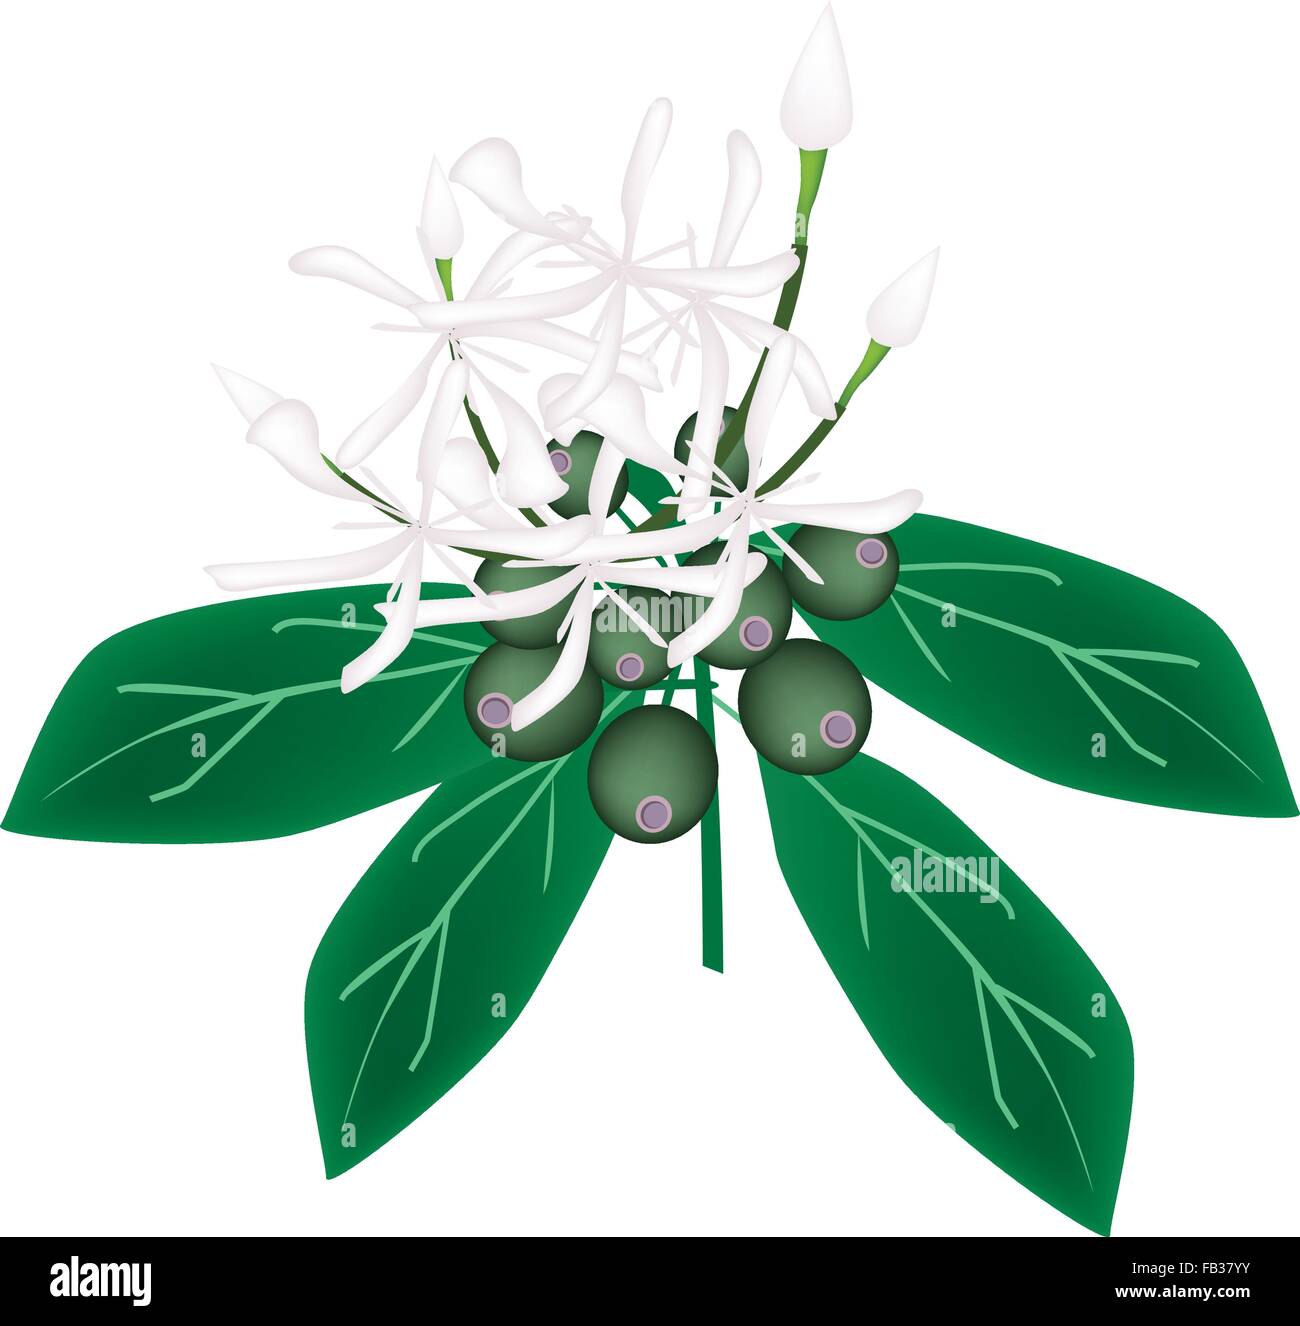 Beautiful Flower, Illustration of White Rubiaceae Flower or White Ixora Flower with Green Leaves Isolated on A White Background Stock Vector